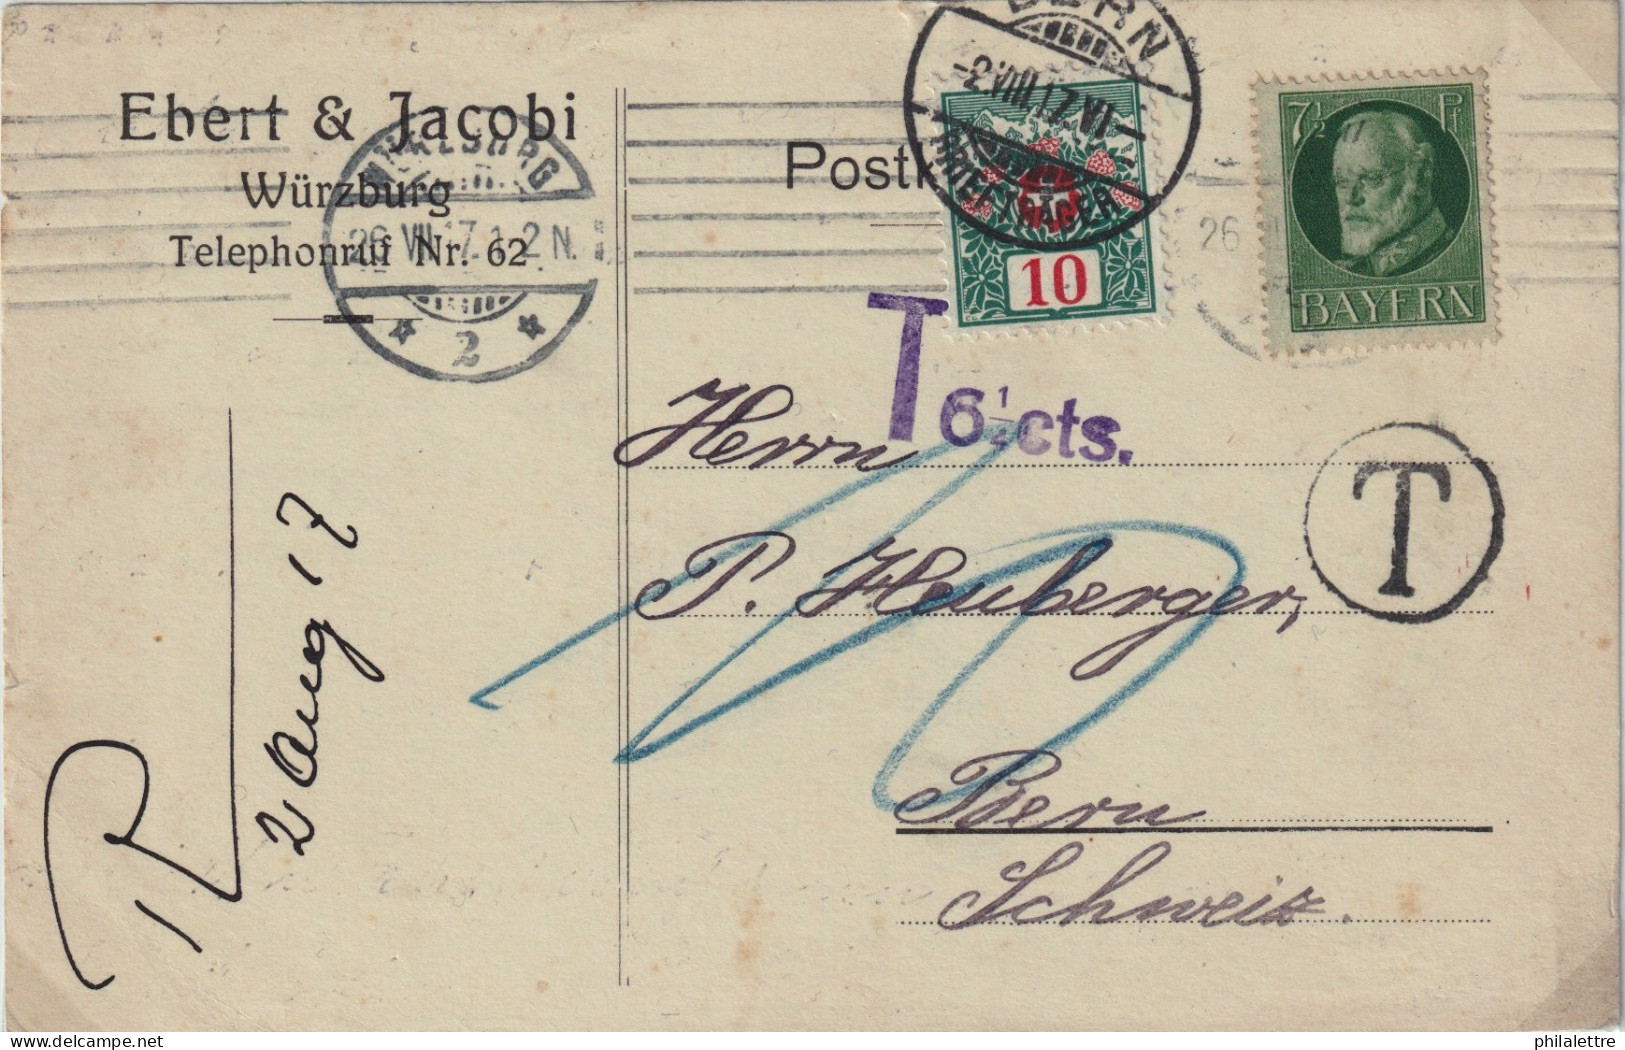 SUISSE / SWITZERLAND 1928 P. Due Mi.32 On PPC From BAVARIA Franked 7-1/2pf With "T 6-1/4cts" Postage Due Mark - Postage Due